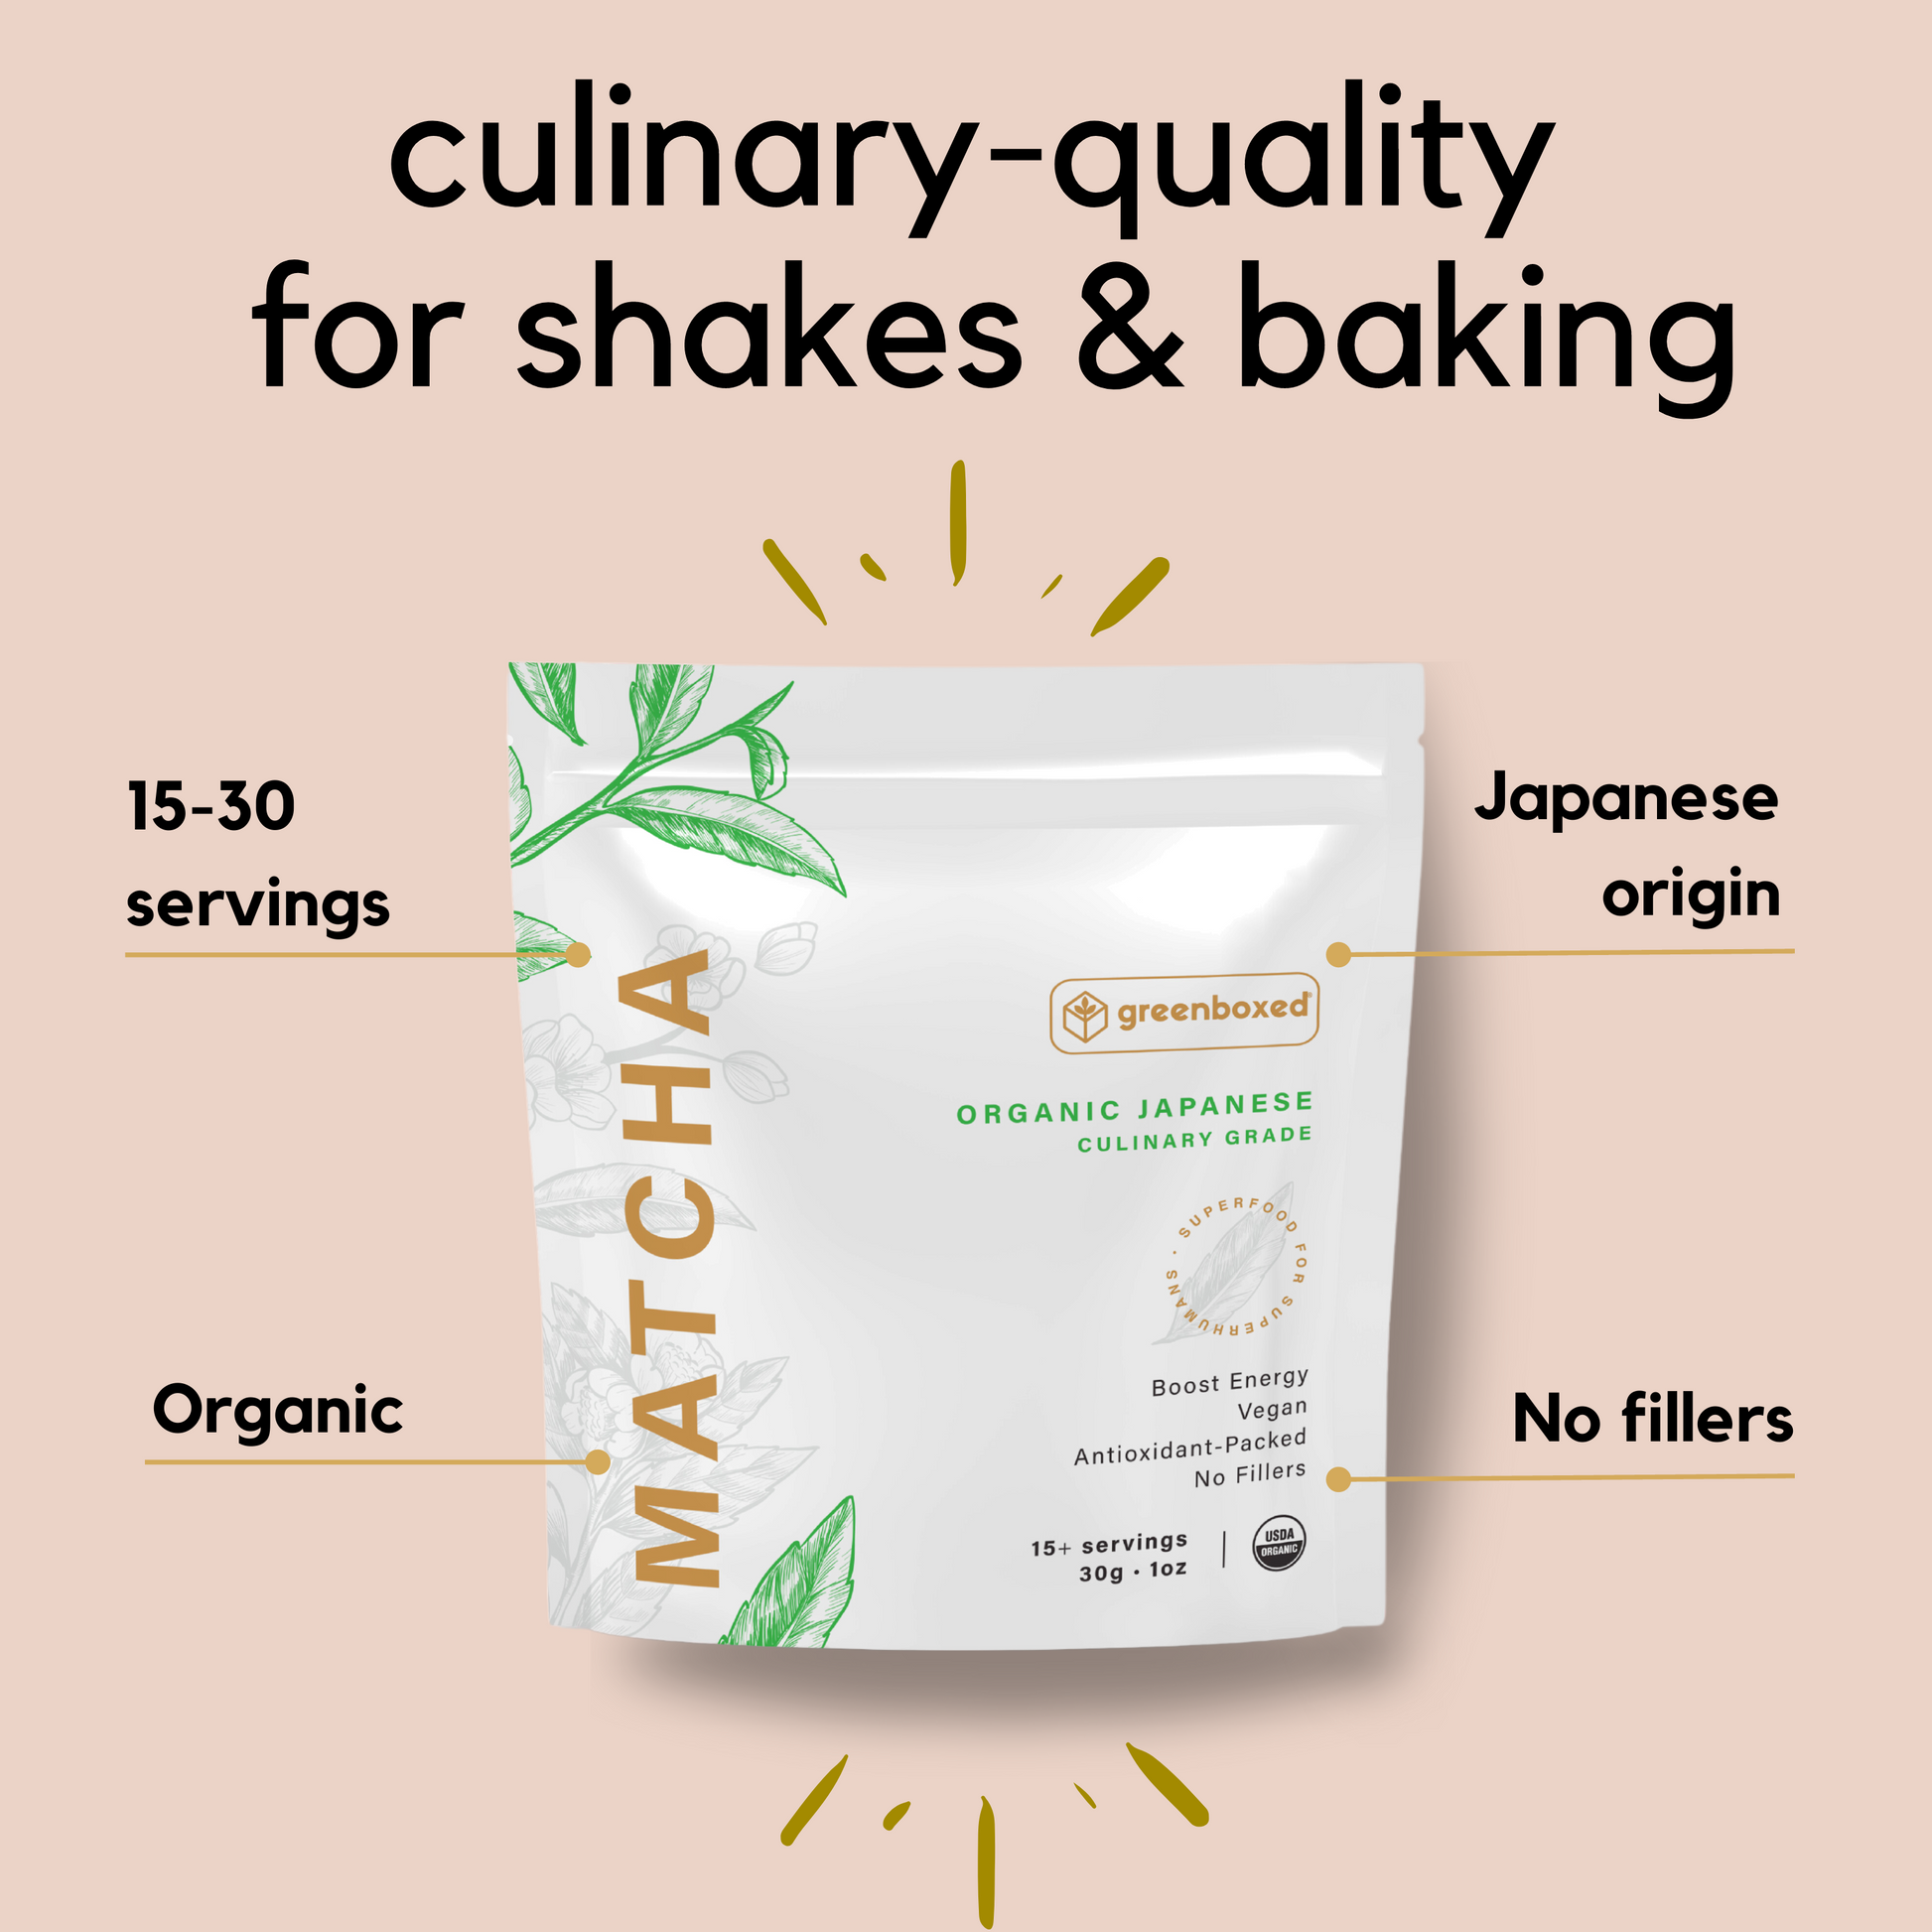 Greenboxed culinary matcha pouch with product description. The image shows the following details: This product is from Japan, Organic, has no fillers, and contains 15 to 30 servings. It also has a headline that states, culinary quality for shakes & baking.